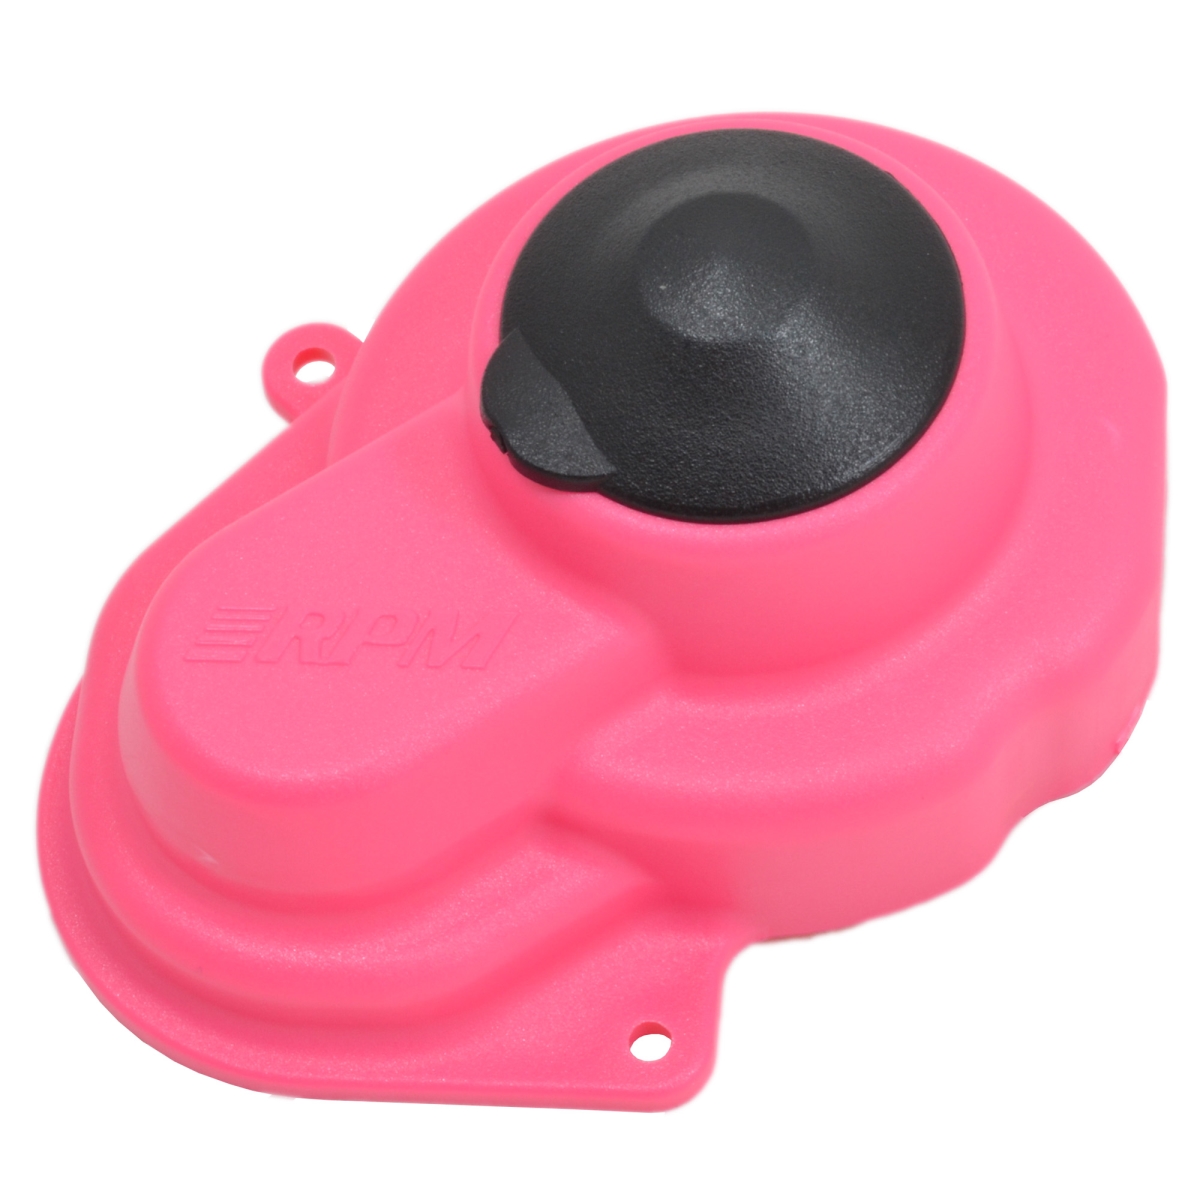 Rpm80527 Sealed Gear Cover, Pink For Traxxas Slash 2wd